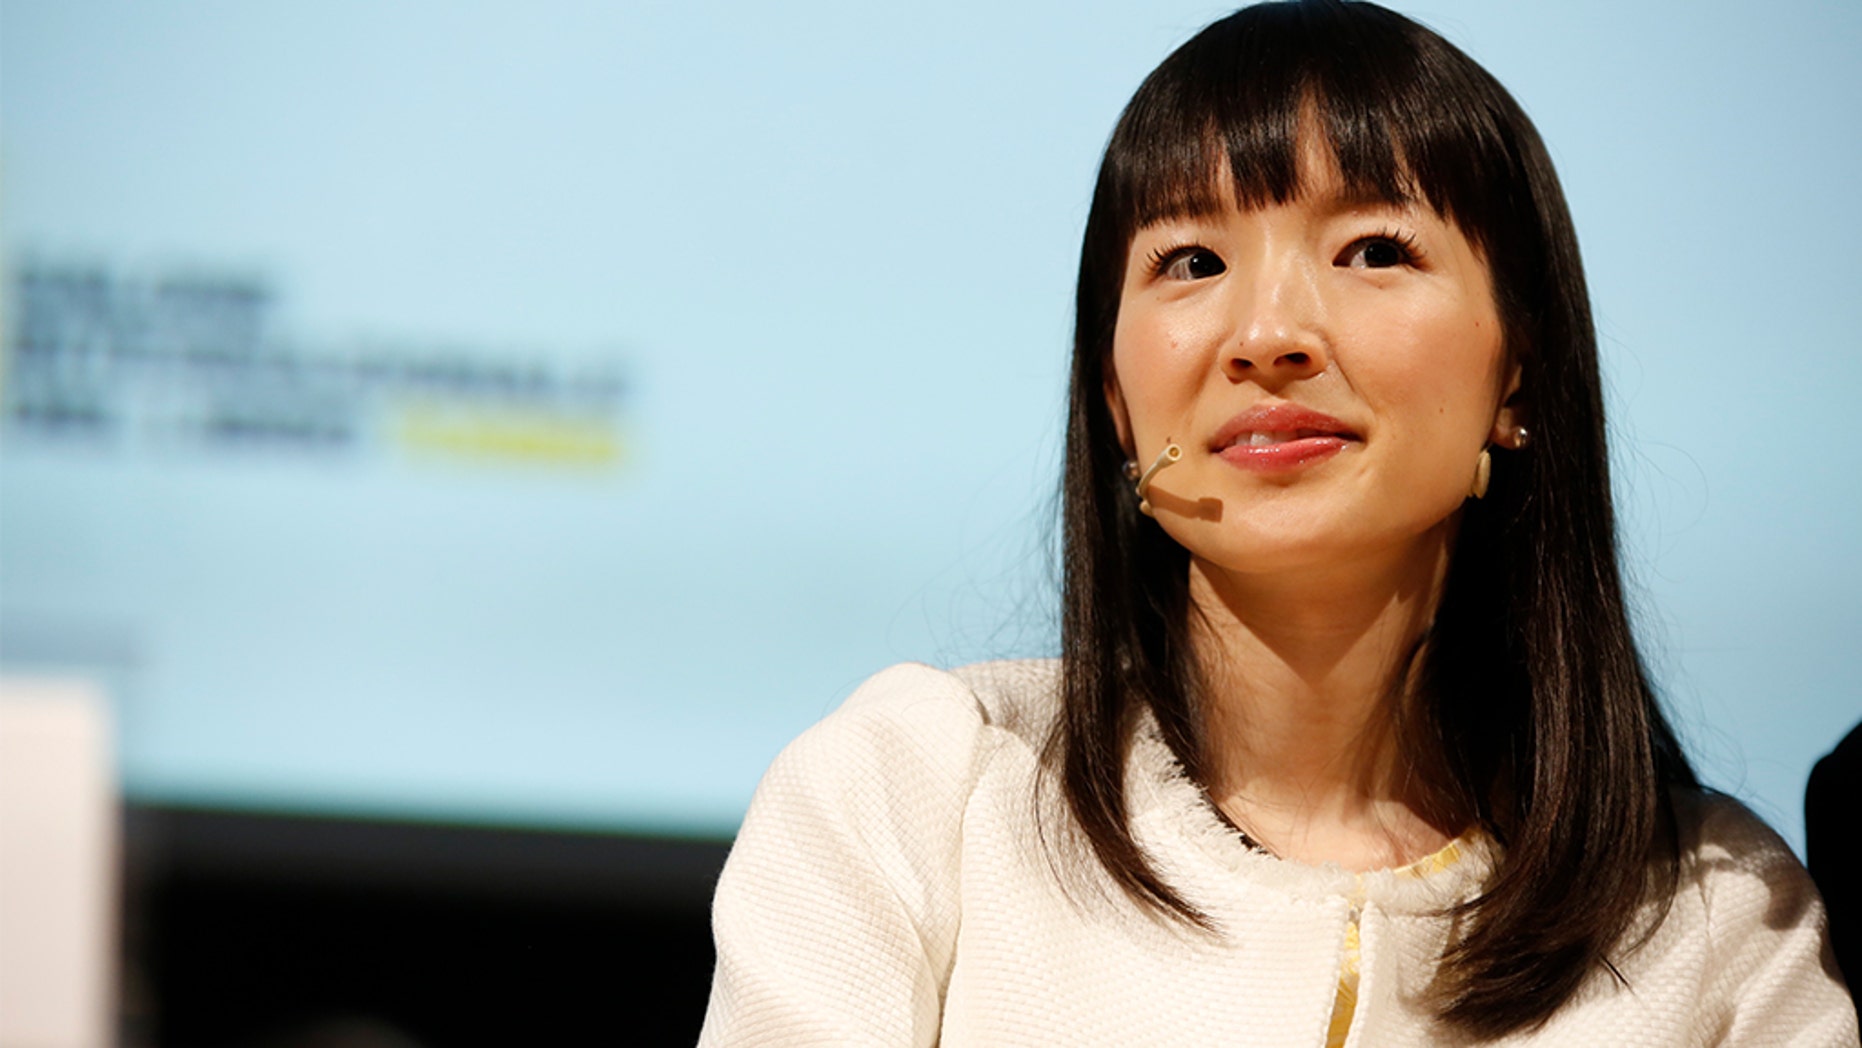 An Israeli newspaper asked in an article published Wednesday whether Marie Kondo, star of Netflix's "Tidying Up with Marie Kondo," could "fix the Israeli-Palestinian mess."